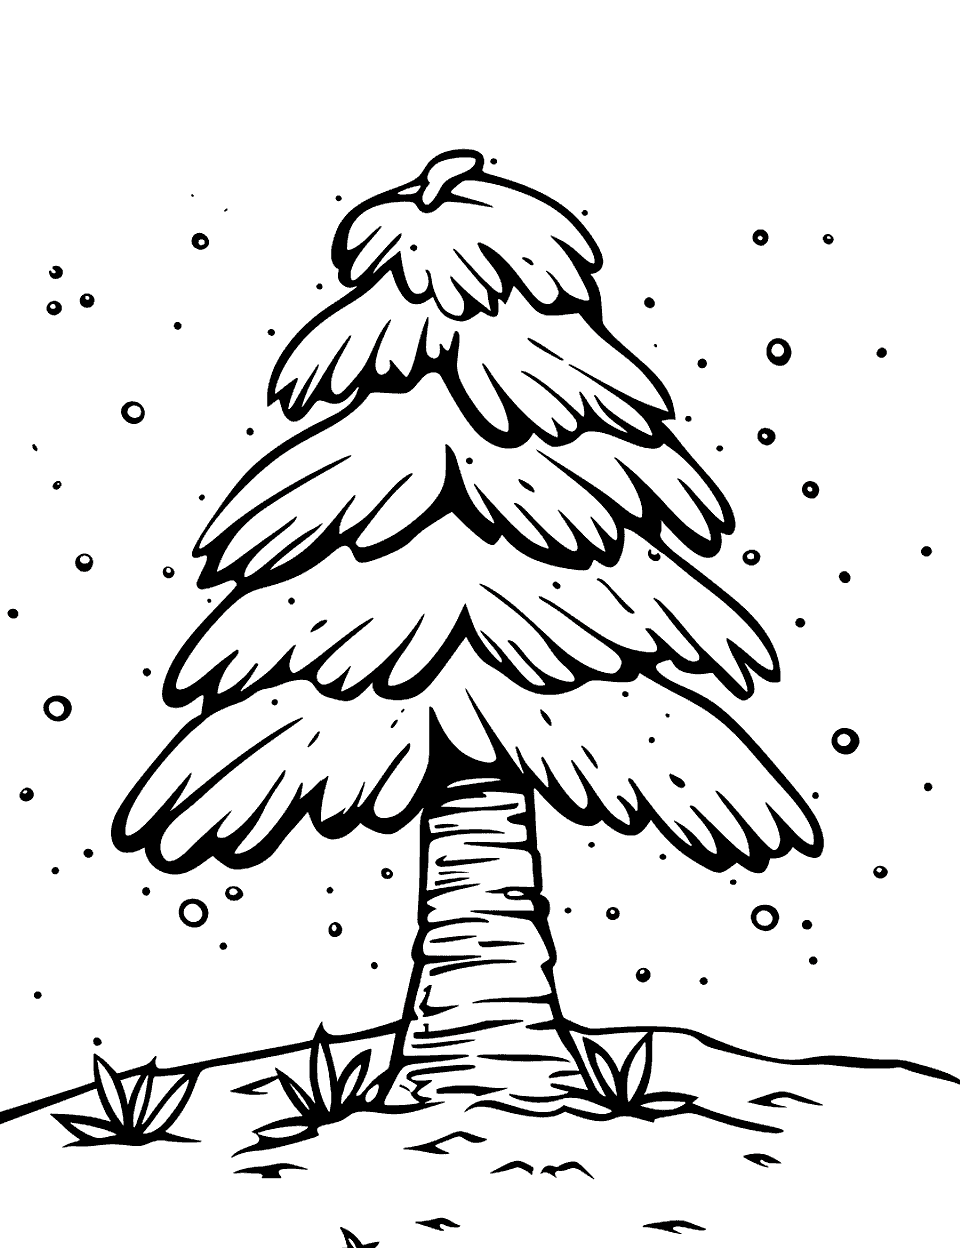 Winter Wonderland Coloring Page - A pine tree covered in snow.